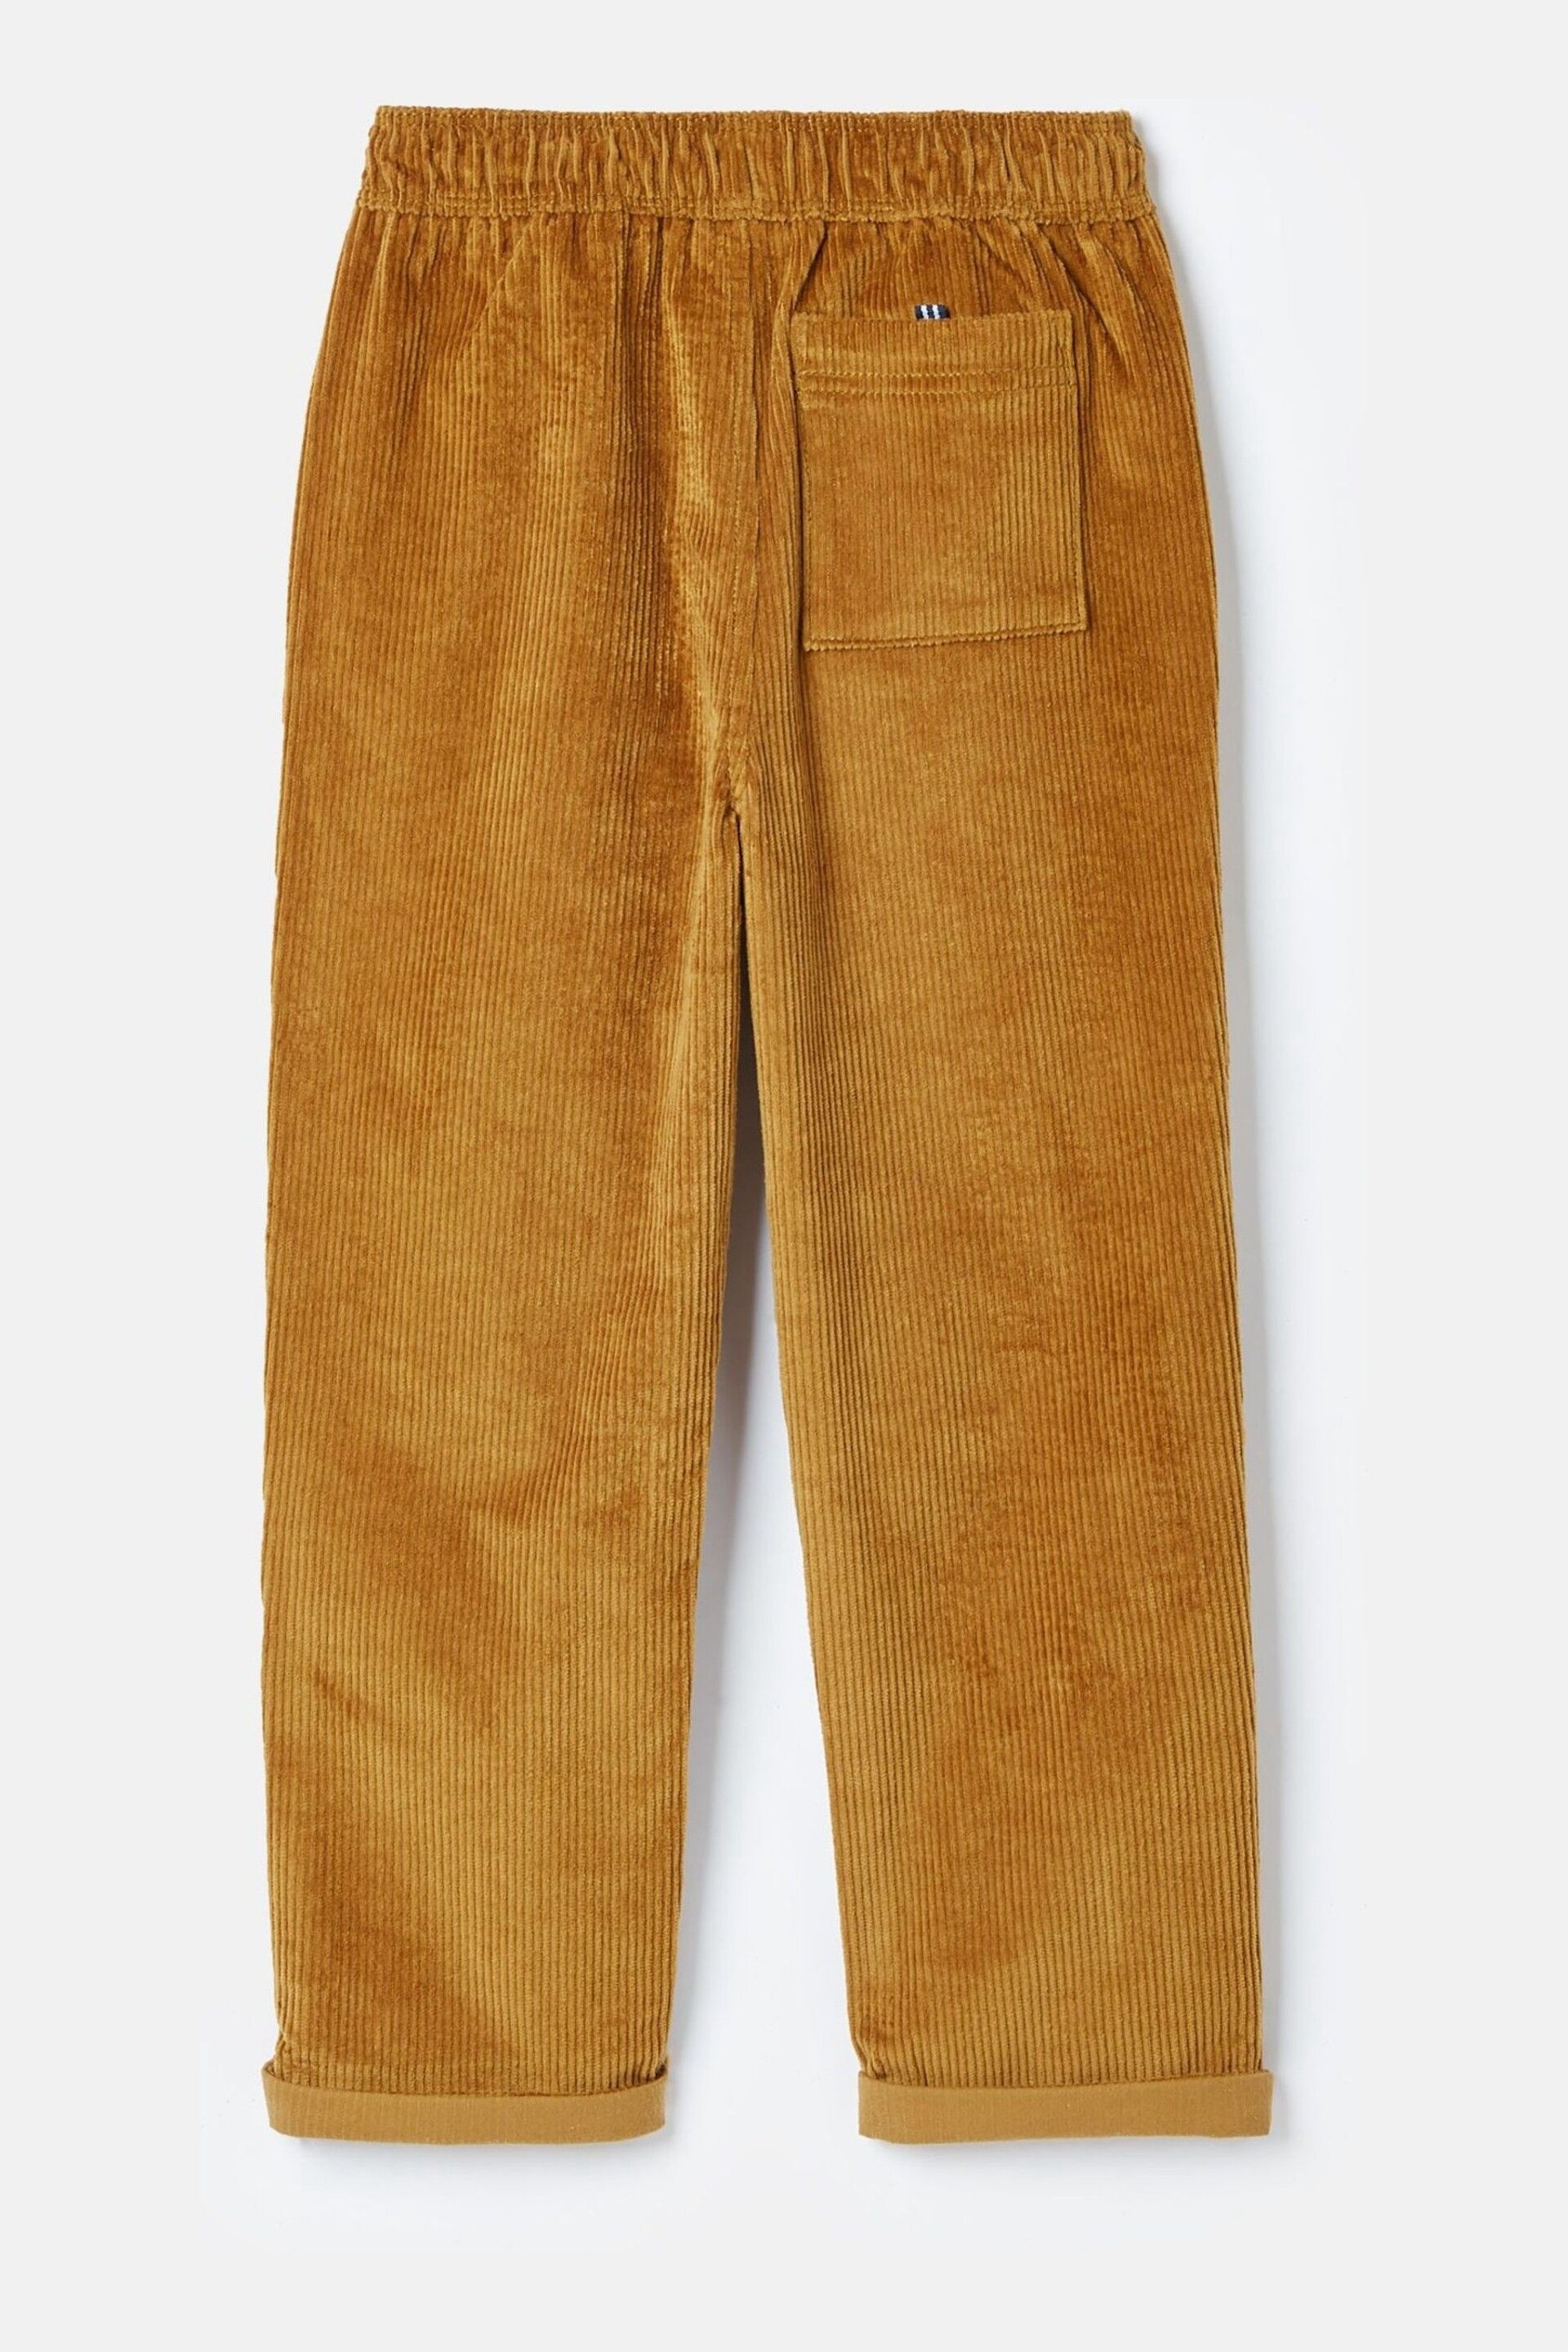 Joules Louis Brown Elasticated Waist Corduroy Trousers - Image 2 of 5